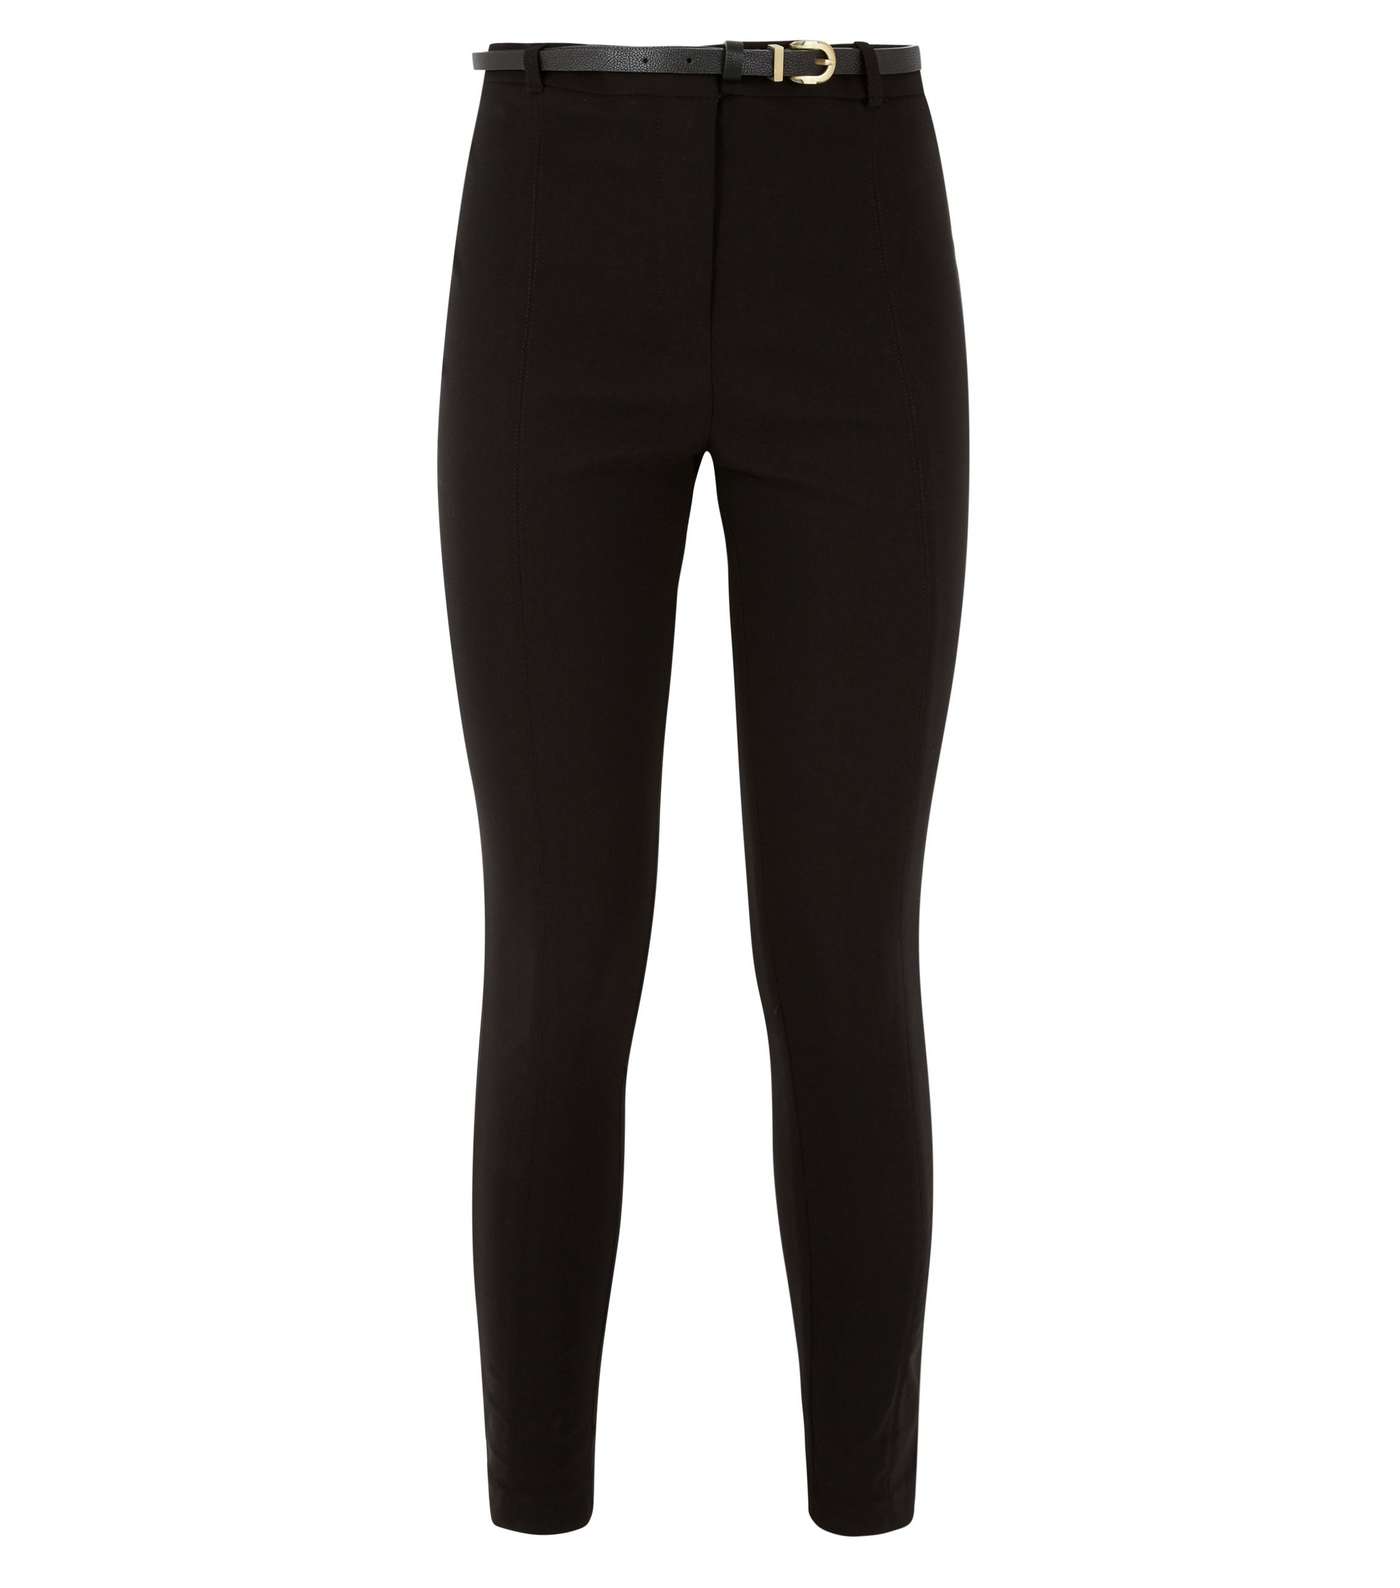 Black Belted Slim Leg Stretch Trousers Image 4